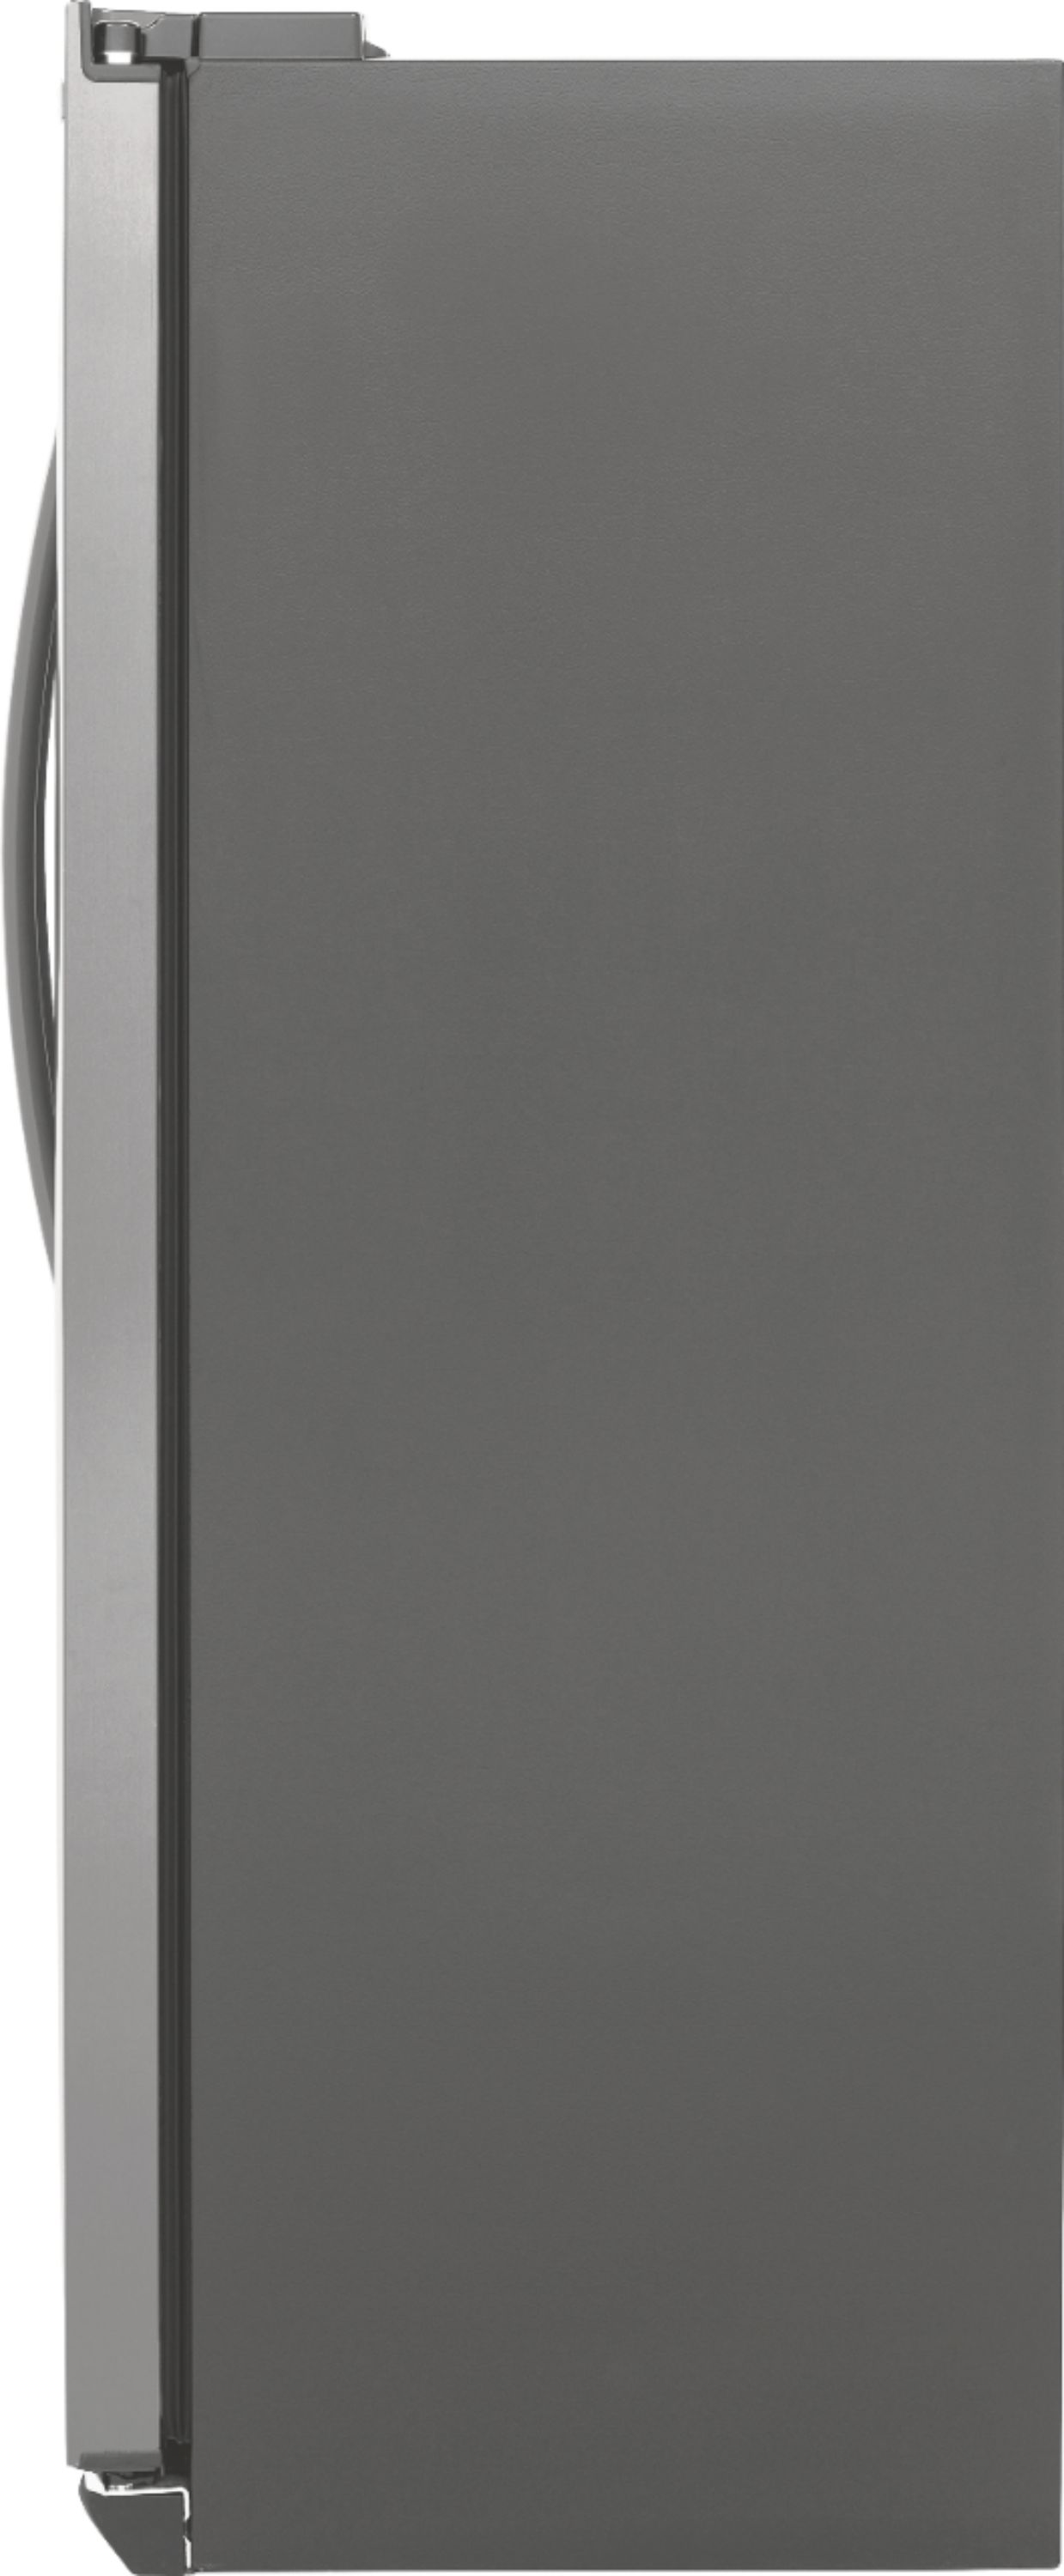 GRSS2352AF Frigidaire Gallery Gallery 22.3 Cu. Ft. 33 Standard Depth Side  by Side Refrigerator STAINLESS STEEL - Metro Appliances & More